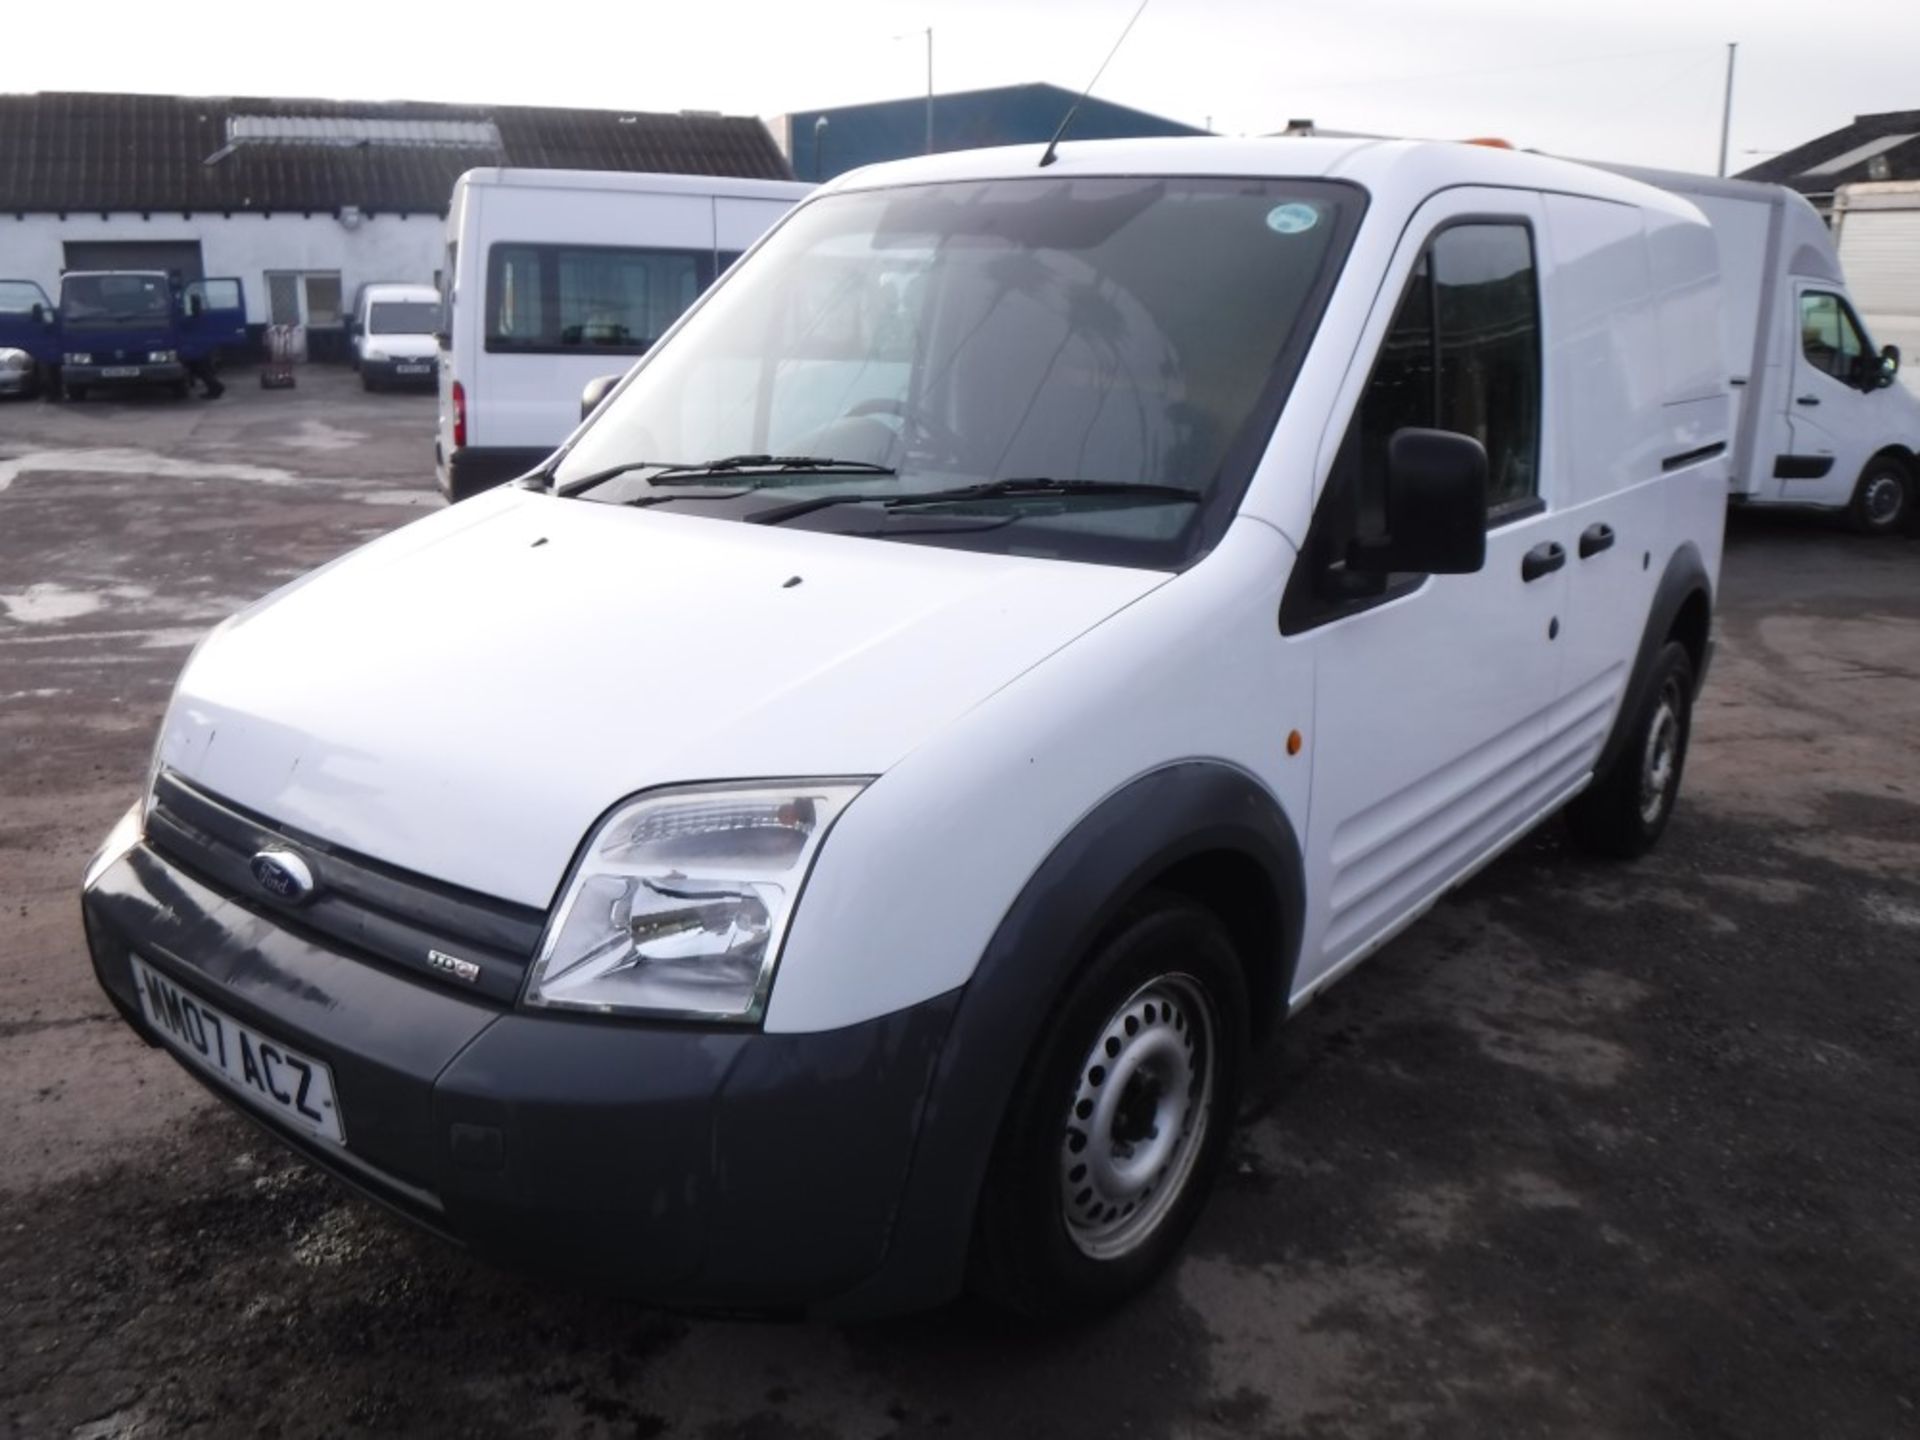 07 reg FORD TRANSIT CONNECT T200 75, 1ST REG 07/07, TEST 07/18, 70275M, V5 HERE, 1 OWNER FROM NEW ( - Image 2 of 5